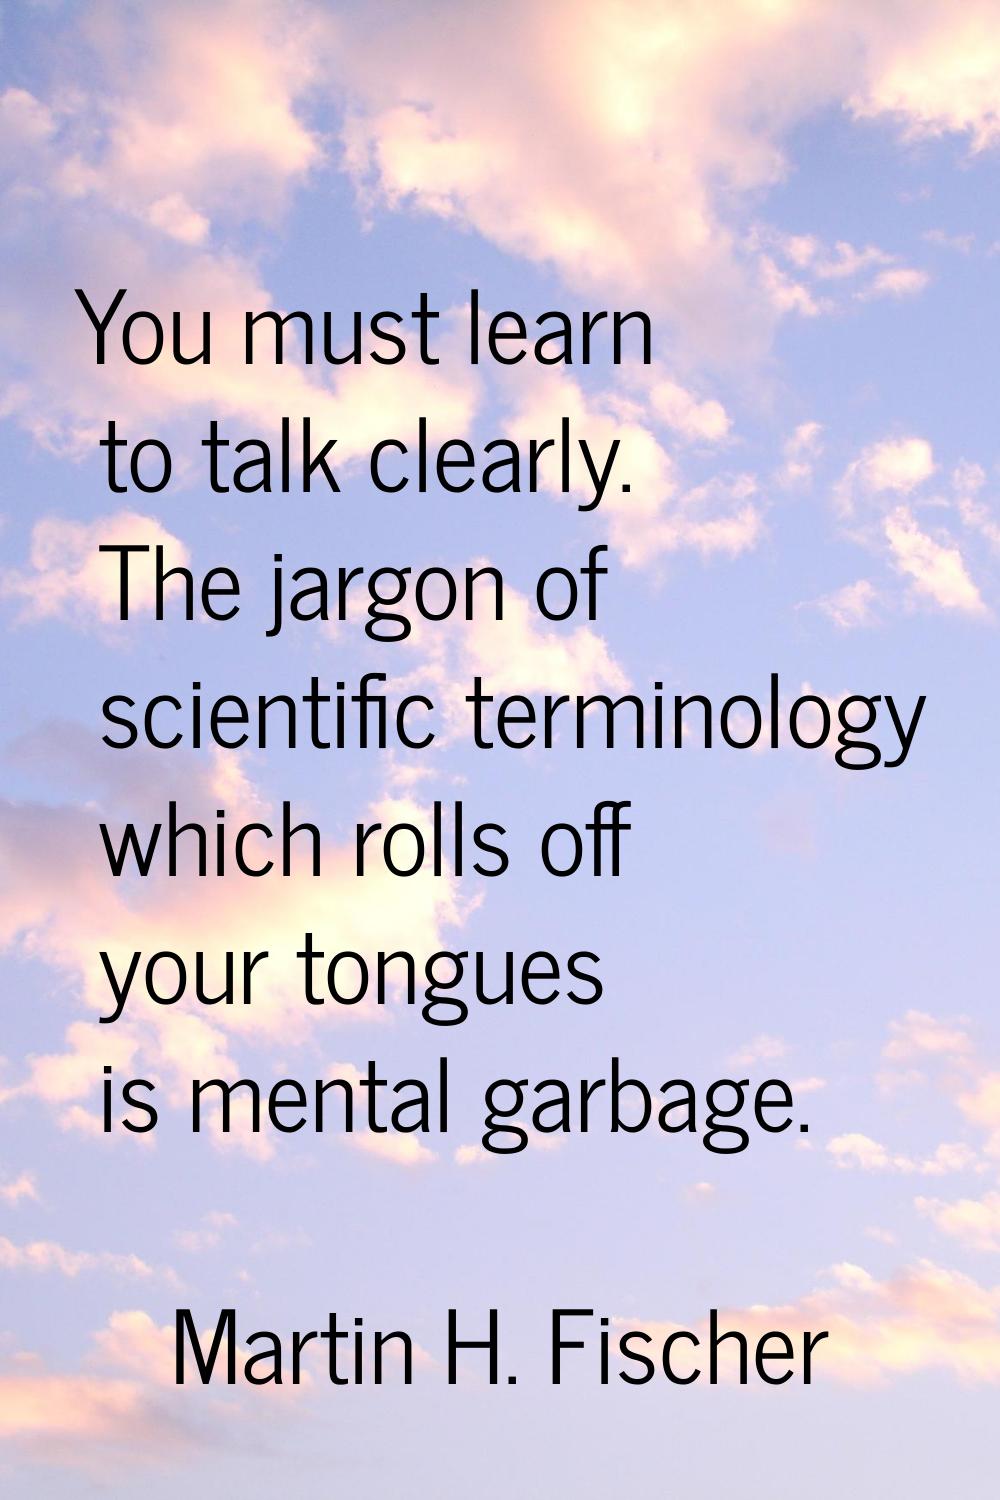 You must learn to talk clearly. The jargon of scientific terminology which rolls off your tongues i